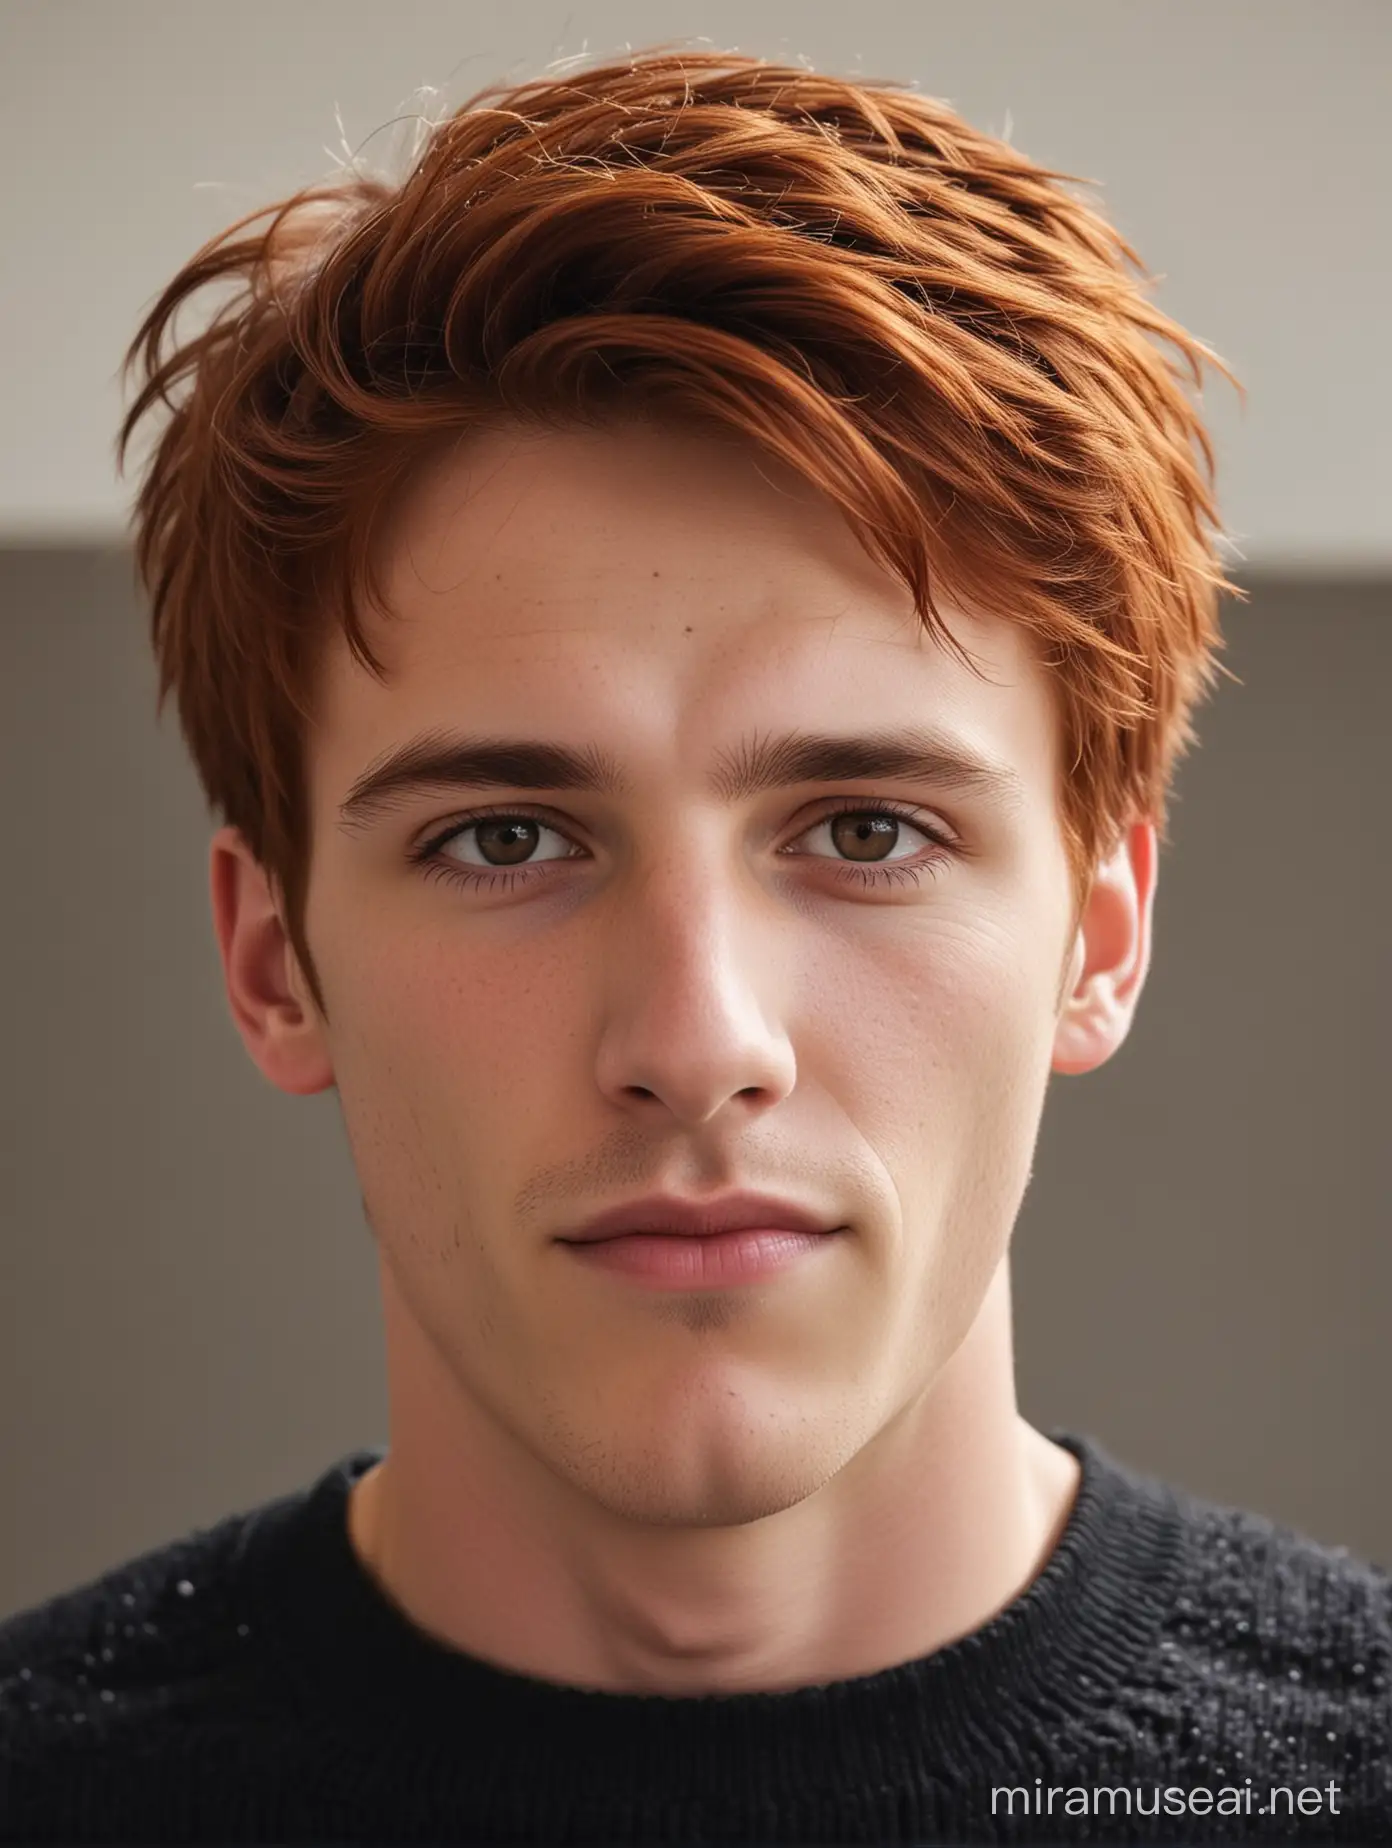 RedHaired European Man in Black Sweater at School